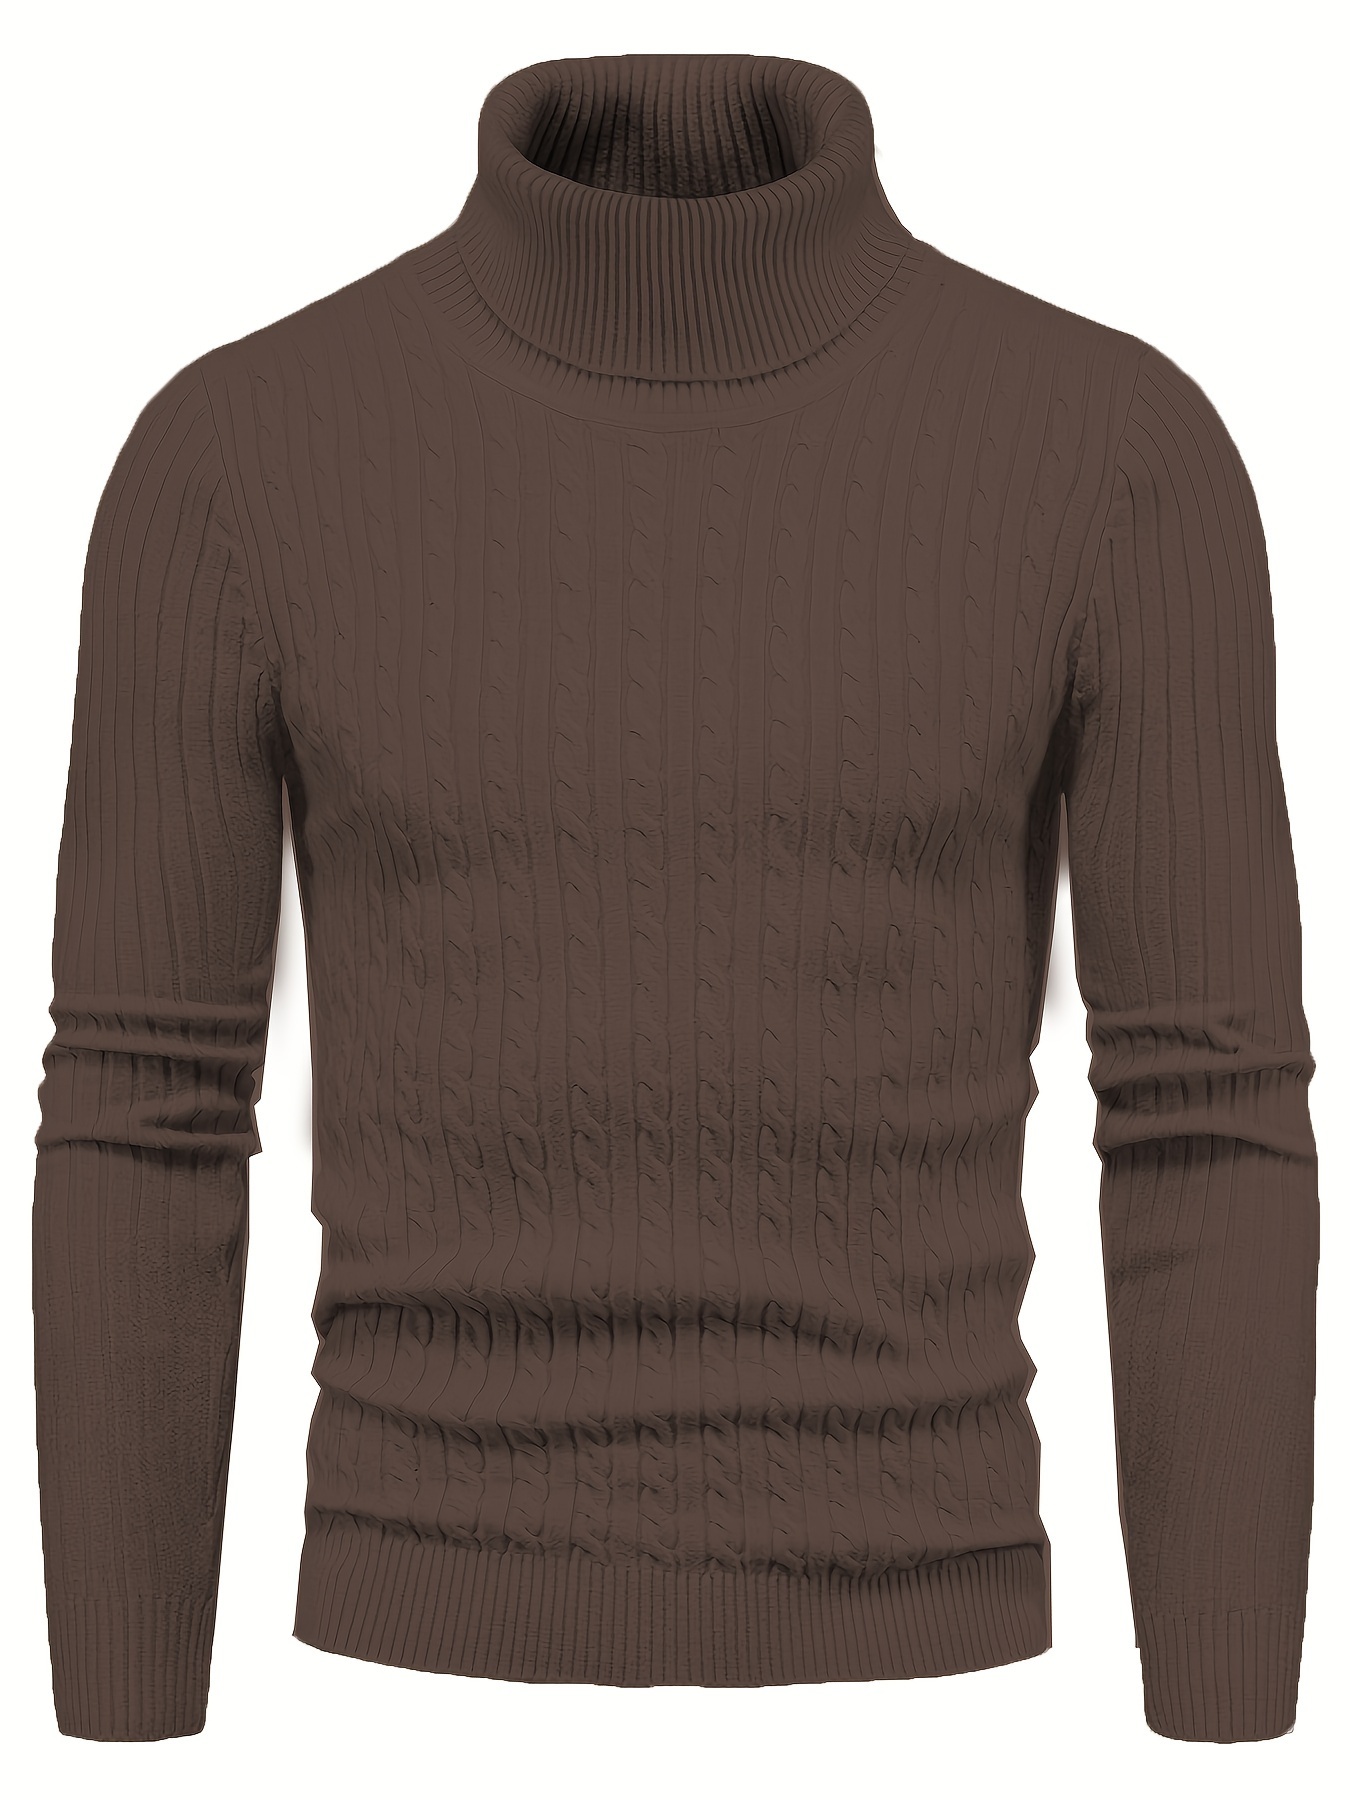 All Match Knitted Solid Sweater, Men's Casual Warm High Stretch Turtleneck Pullover Sweater For Men Fall Winter